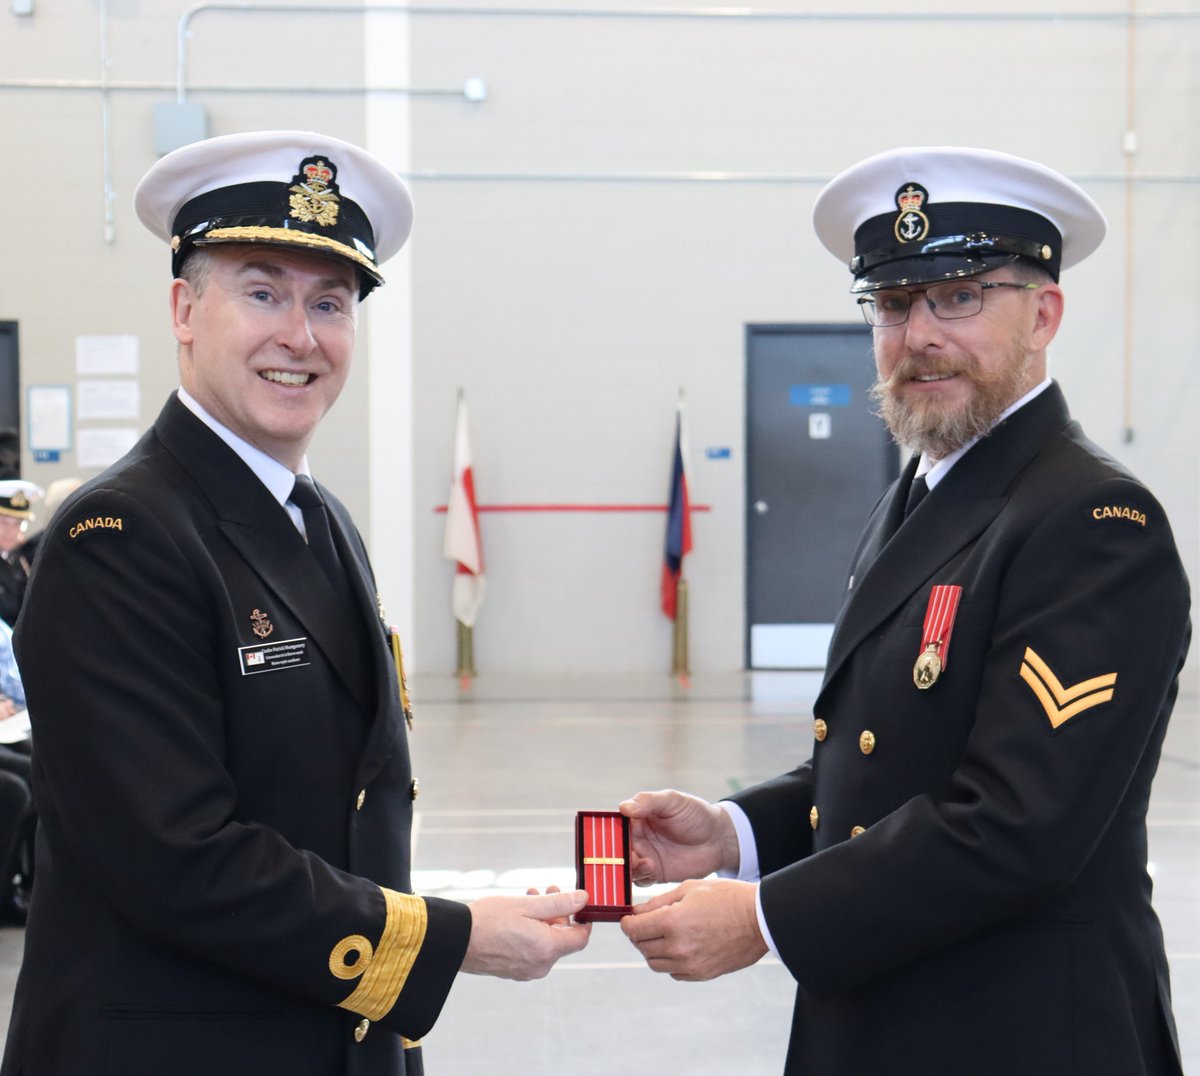 Congratulations to PO2 Bell, S1 Kilpatrick, and PO1 Newman, who all received the first clasp on their Canadian Forces’ Decoration (CD) medal, signifying a total of 22 years of good conduct in the Canadian Armed Forces.

@RoyalCanNavy #WeTheNavy #victoriabc #yyj